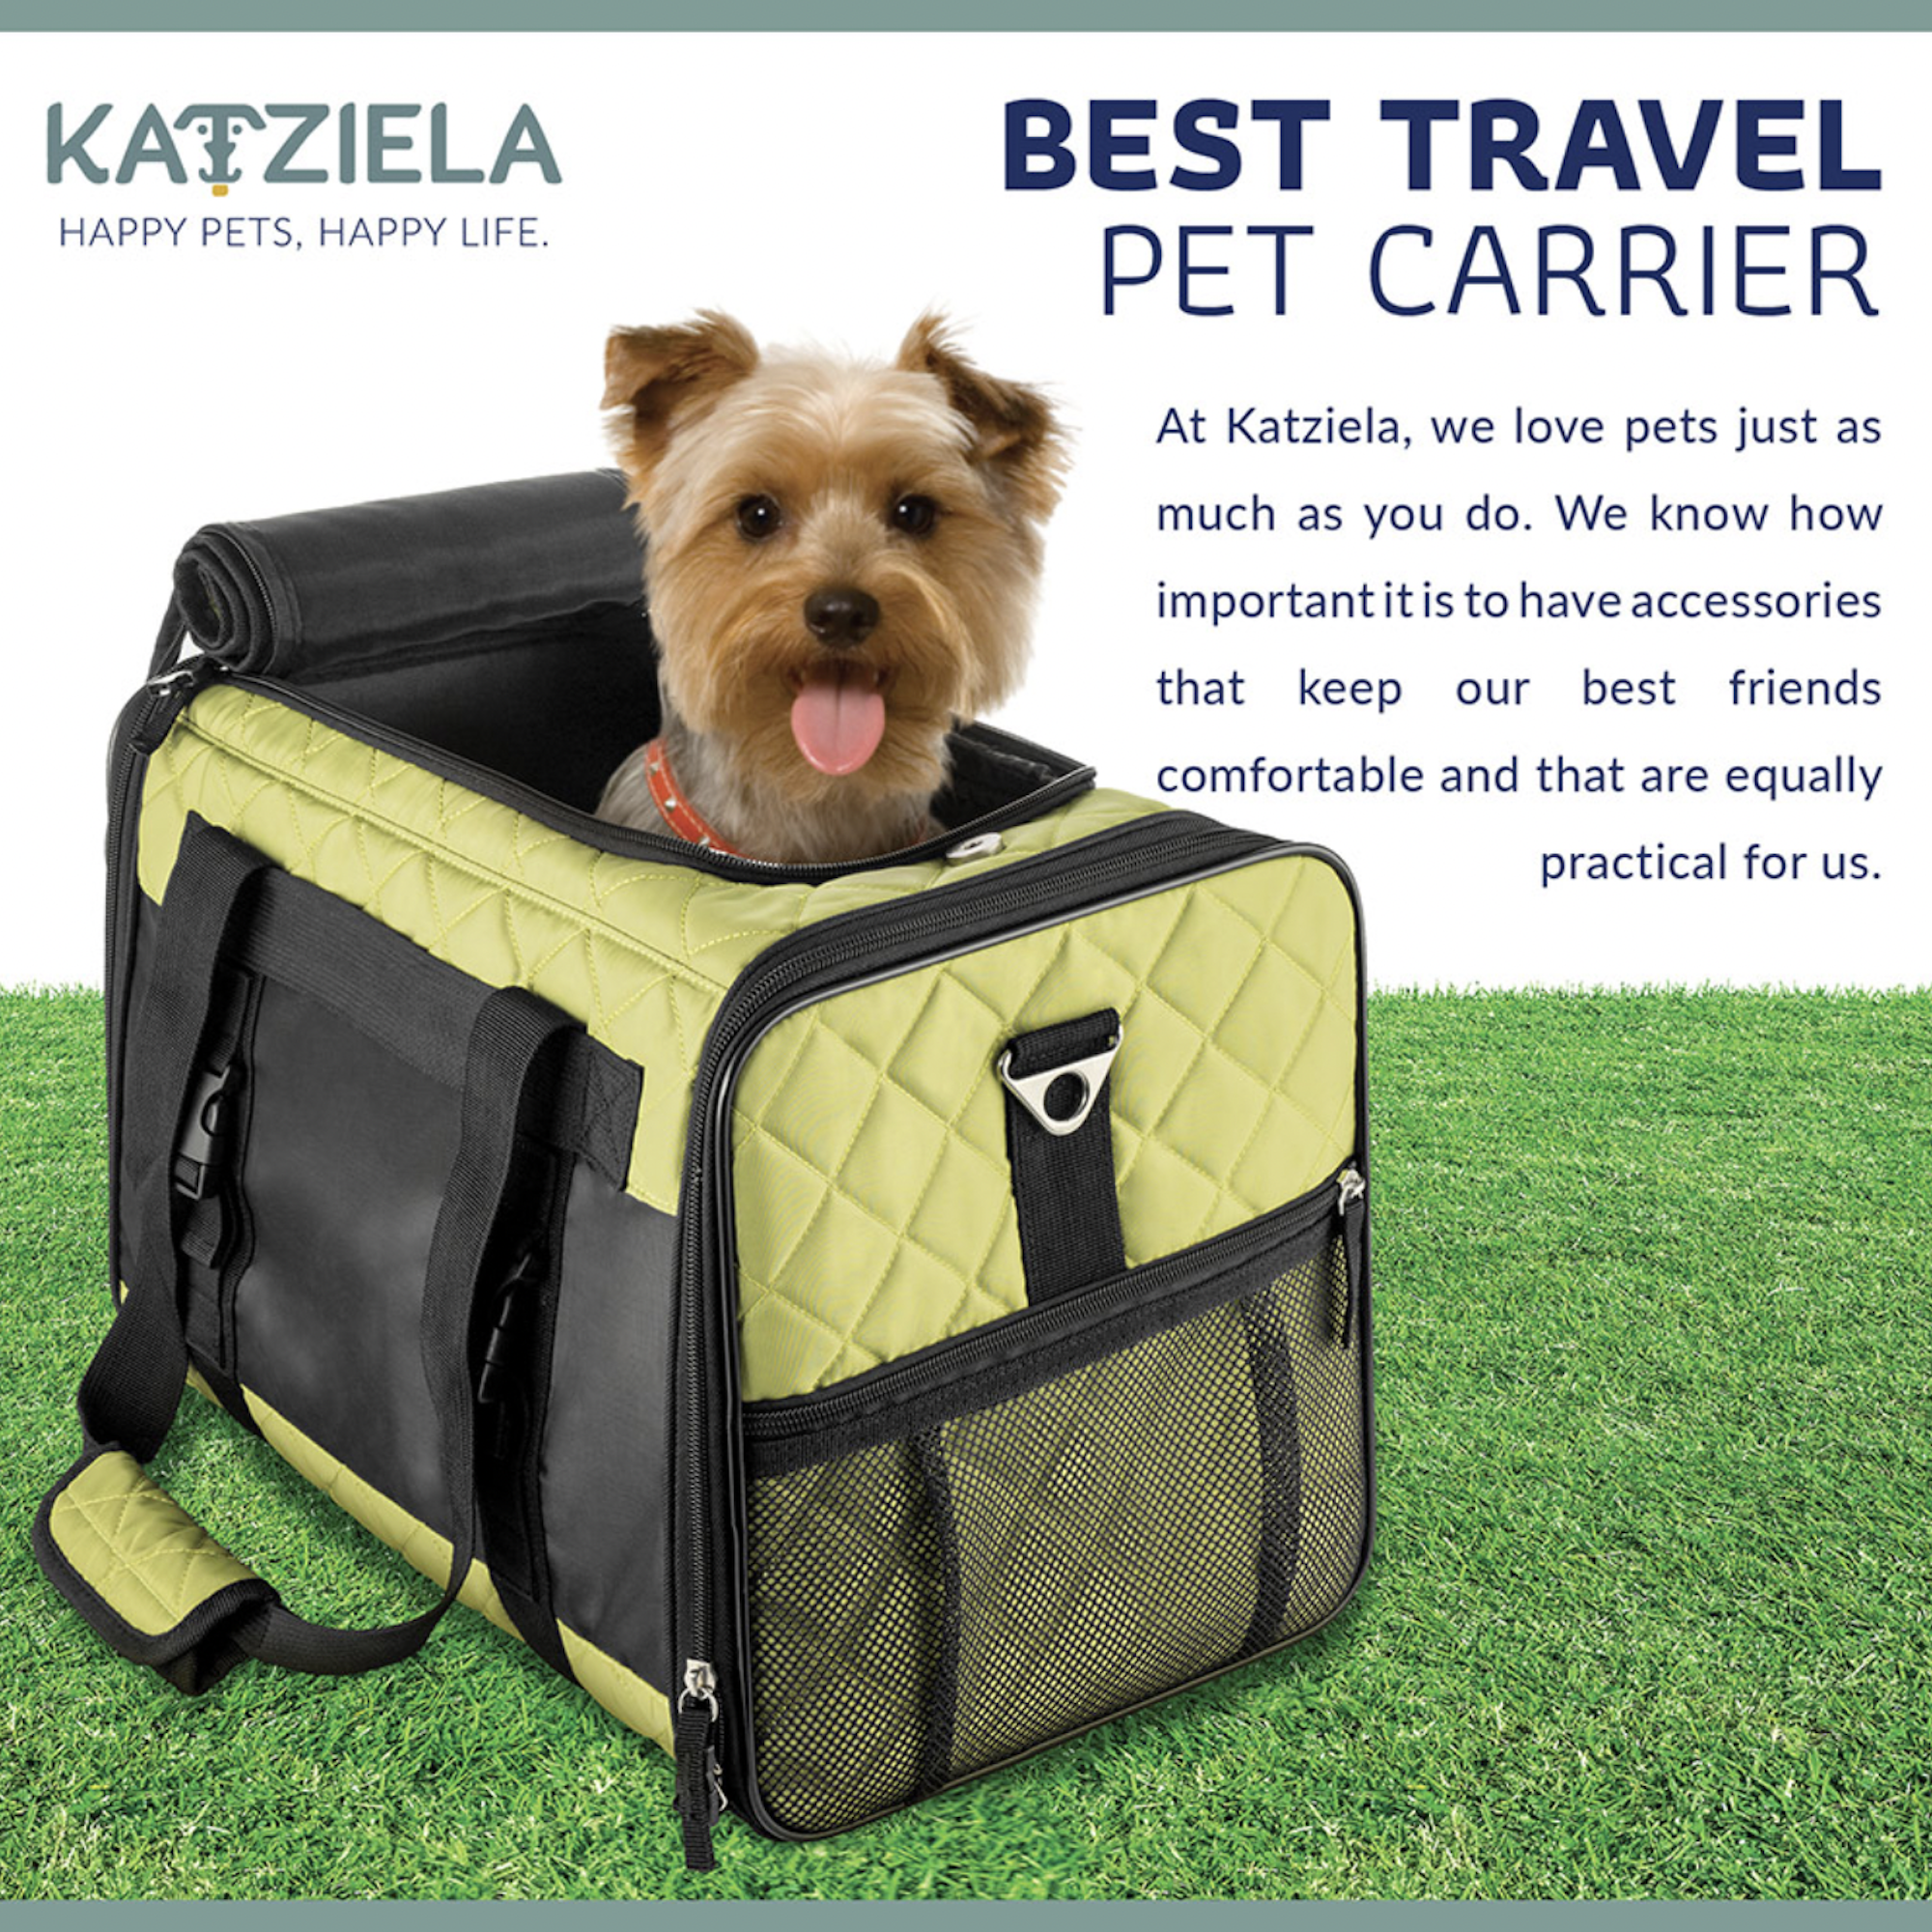 https://images.baxterboo.com/global/images/products/large/katziela-quilted-companion-pet-carrier-gray-4065.png